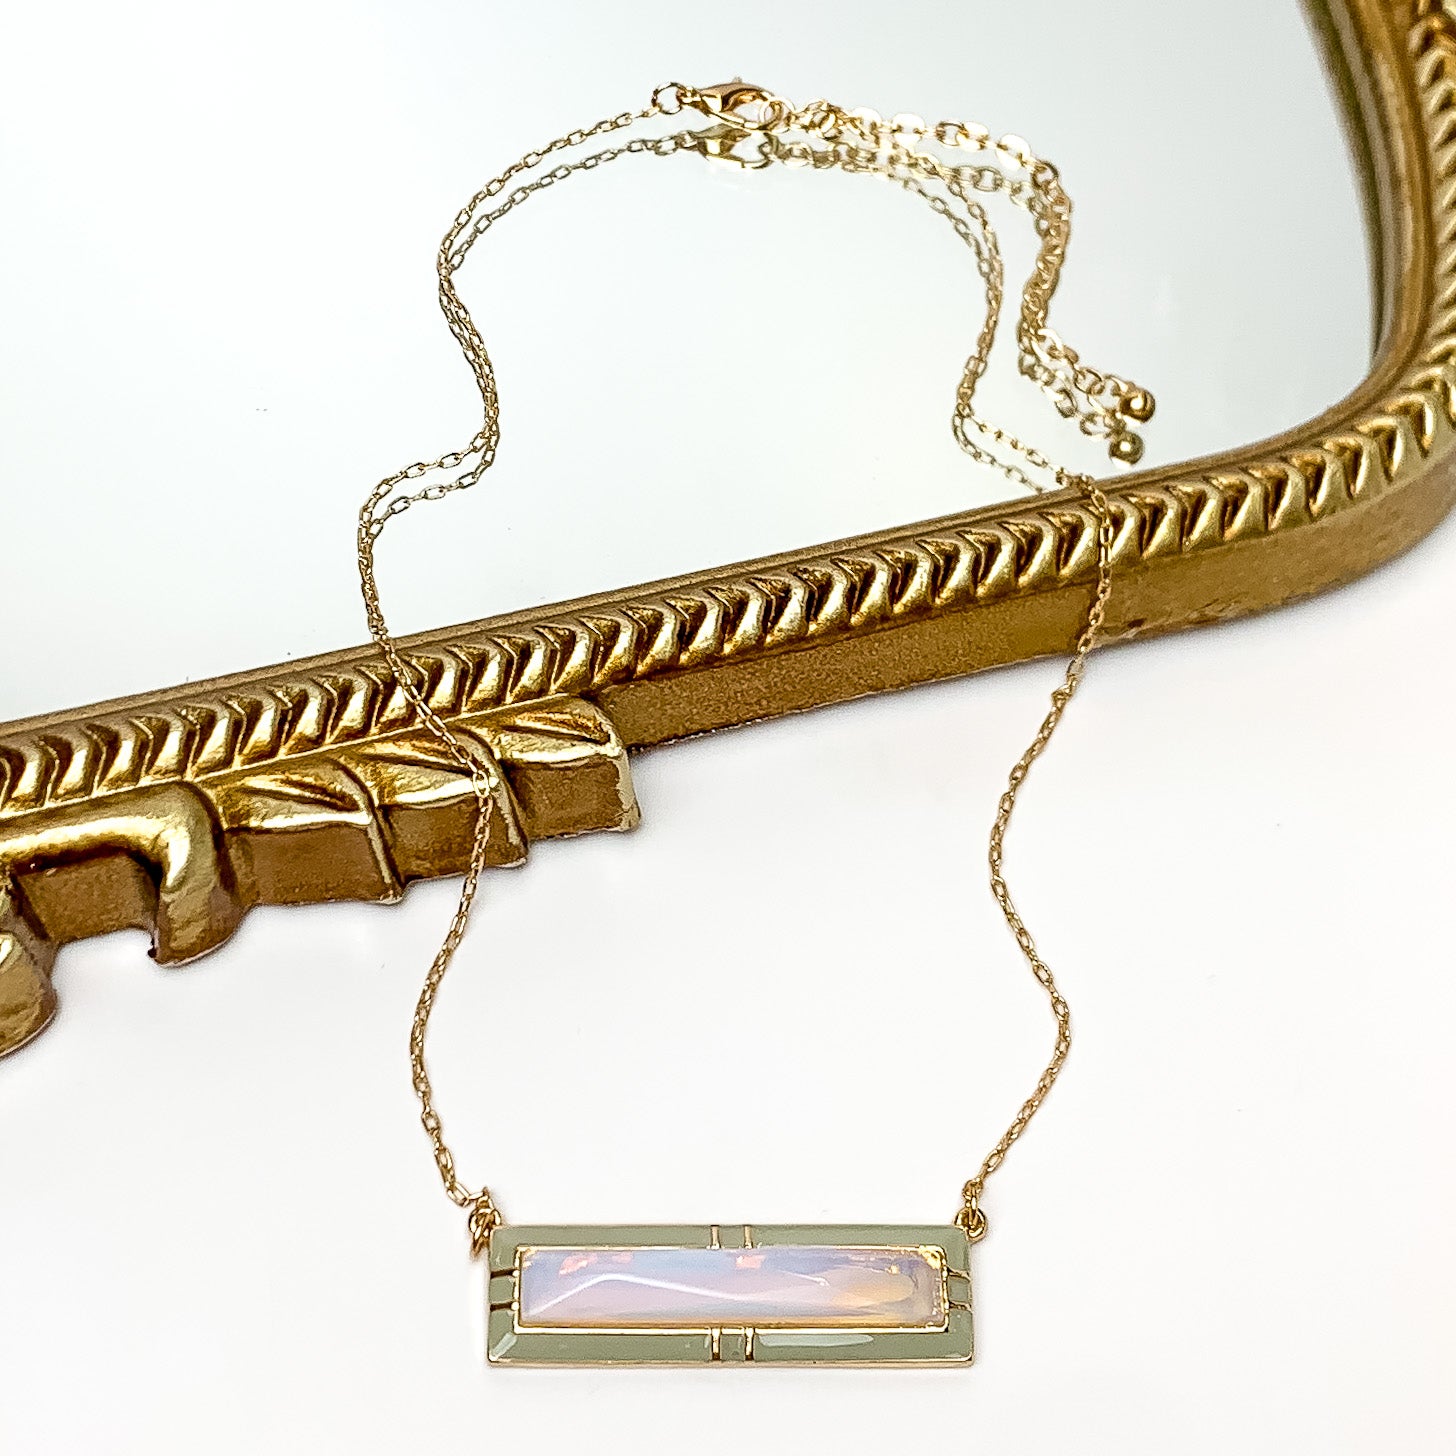 Everyday Gold Tone Chain Necklace With Rectangular Pendant in Opal - Giddy Up Glamour Boutique